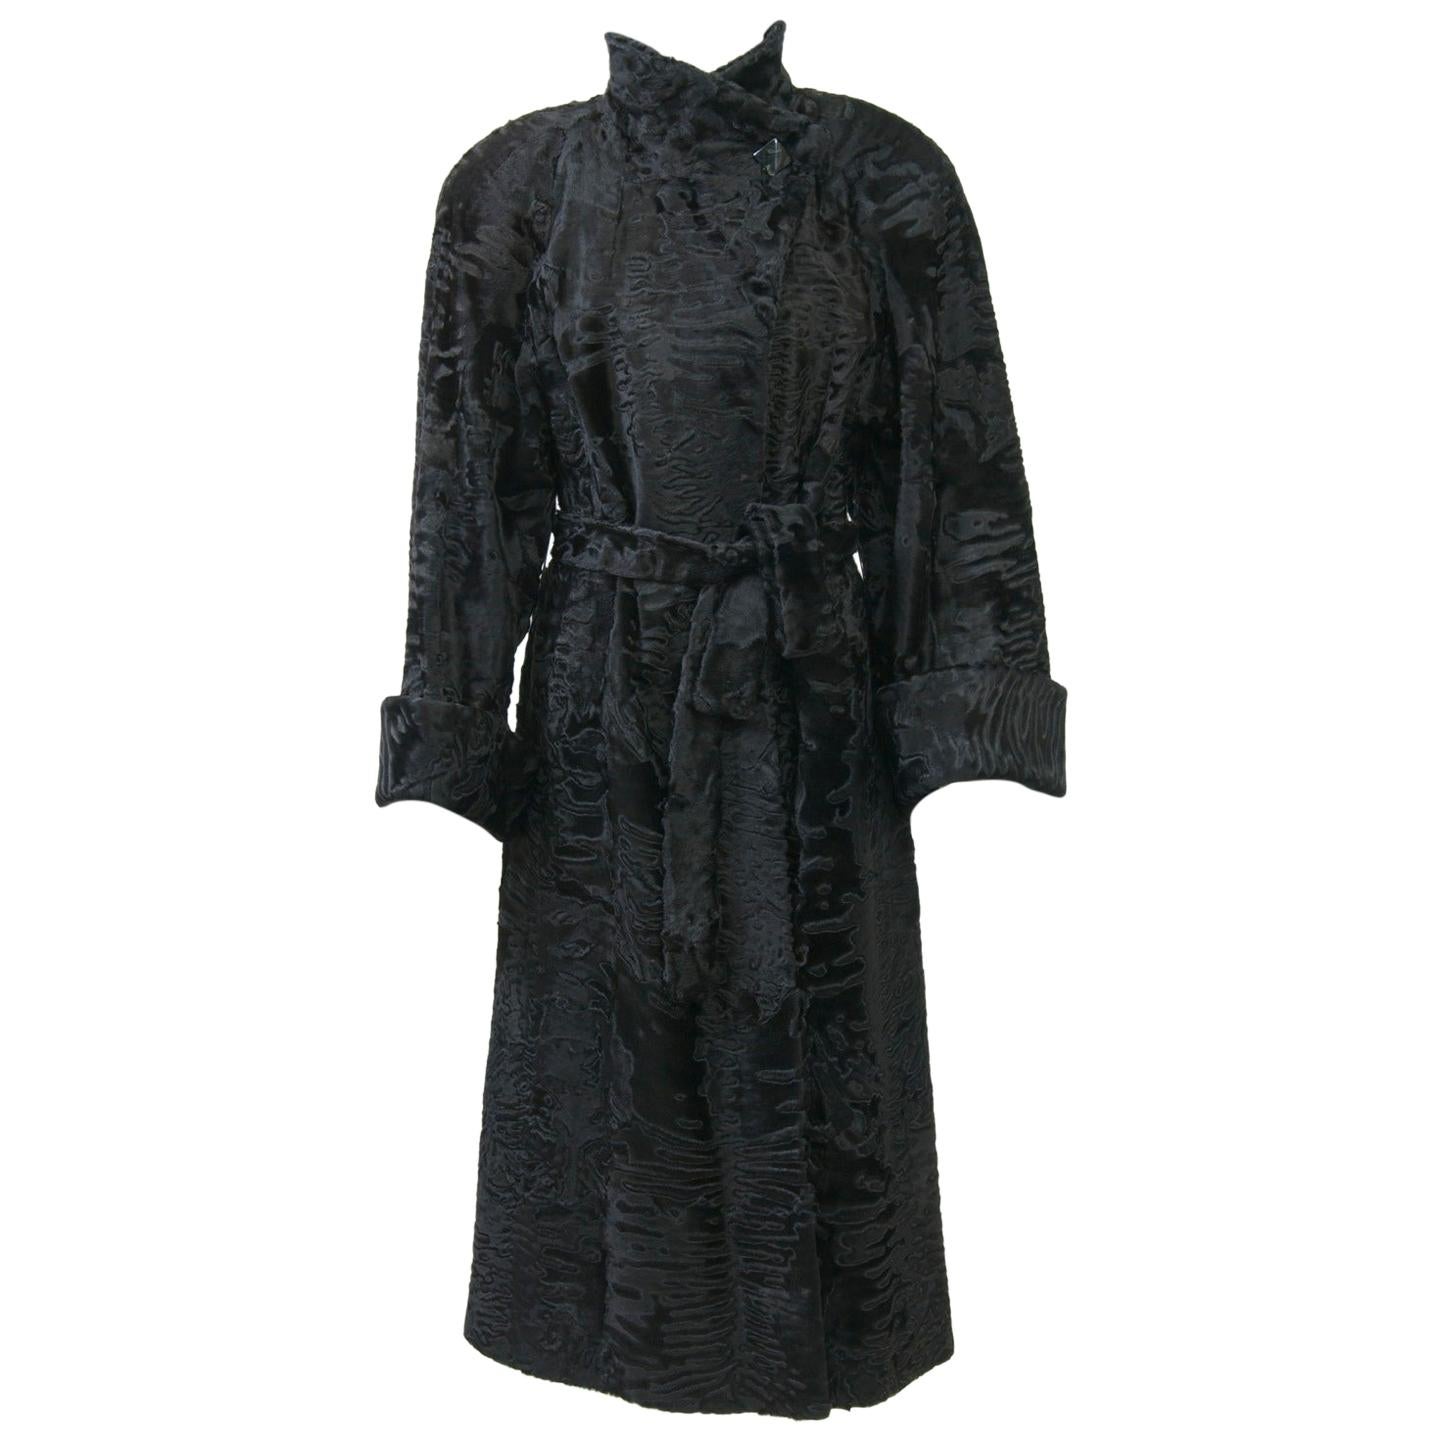 Christian Dior Military Coat With Dior Crest on Pocket at 1stDibs